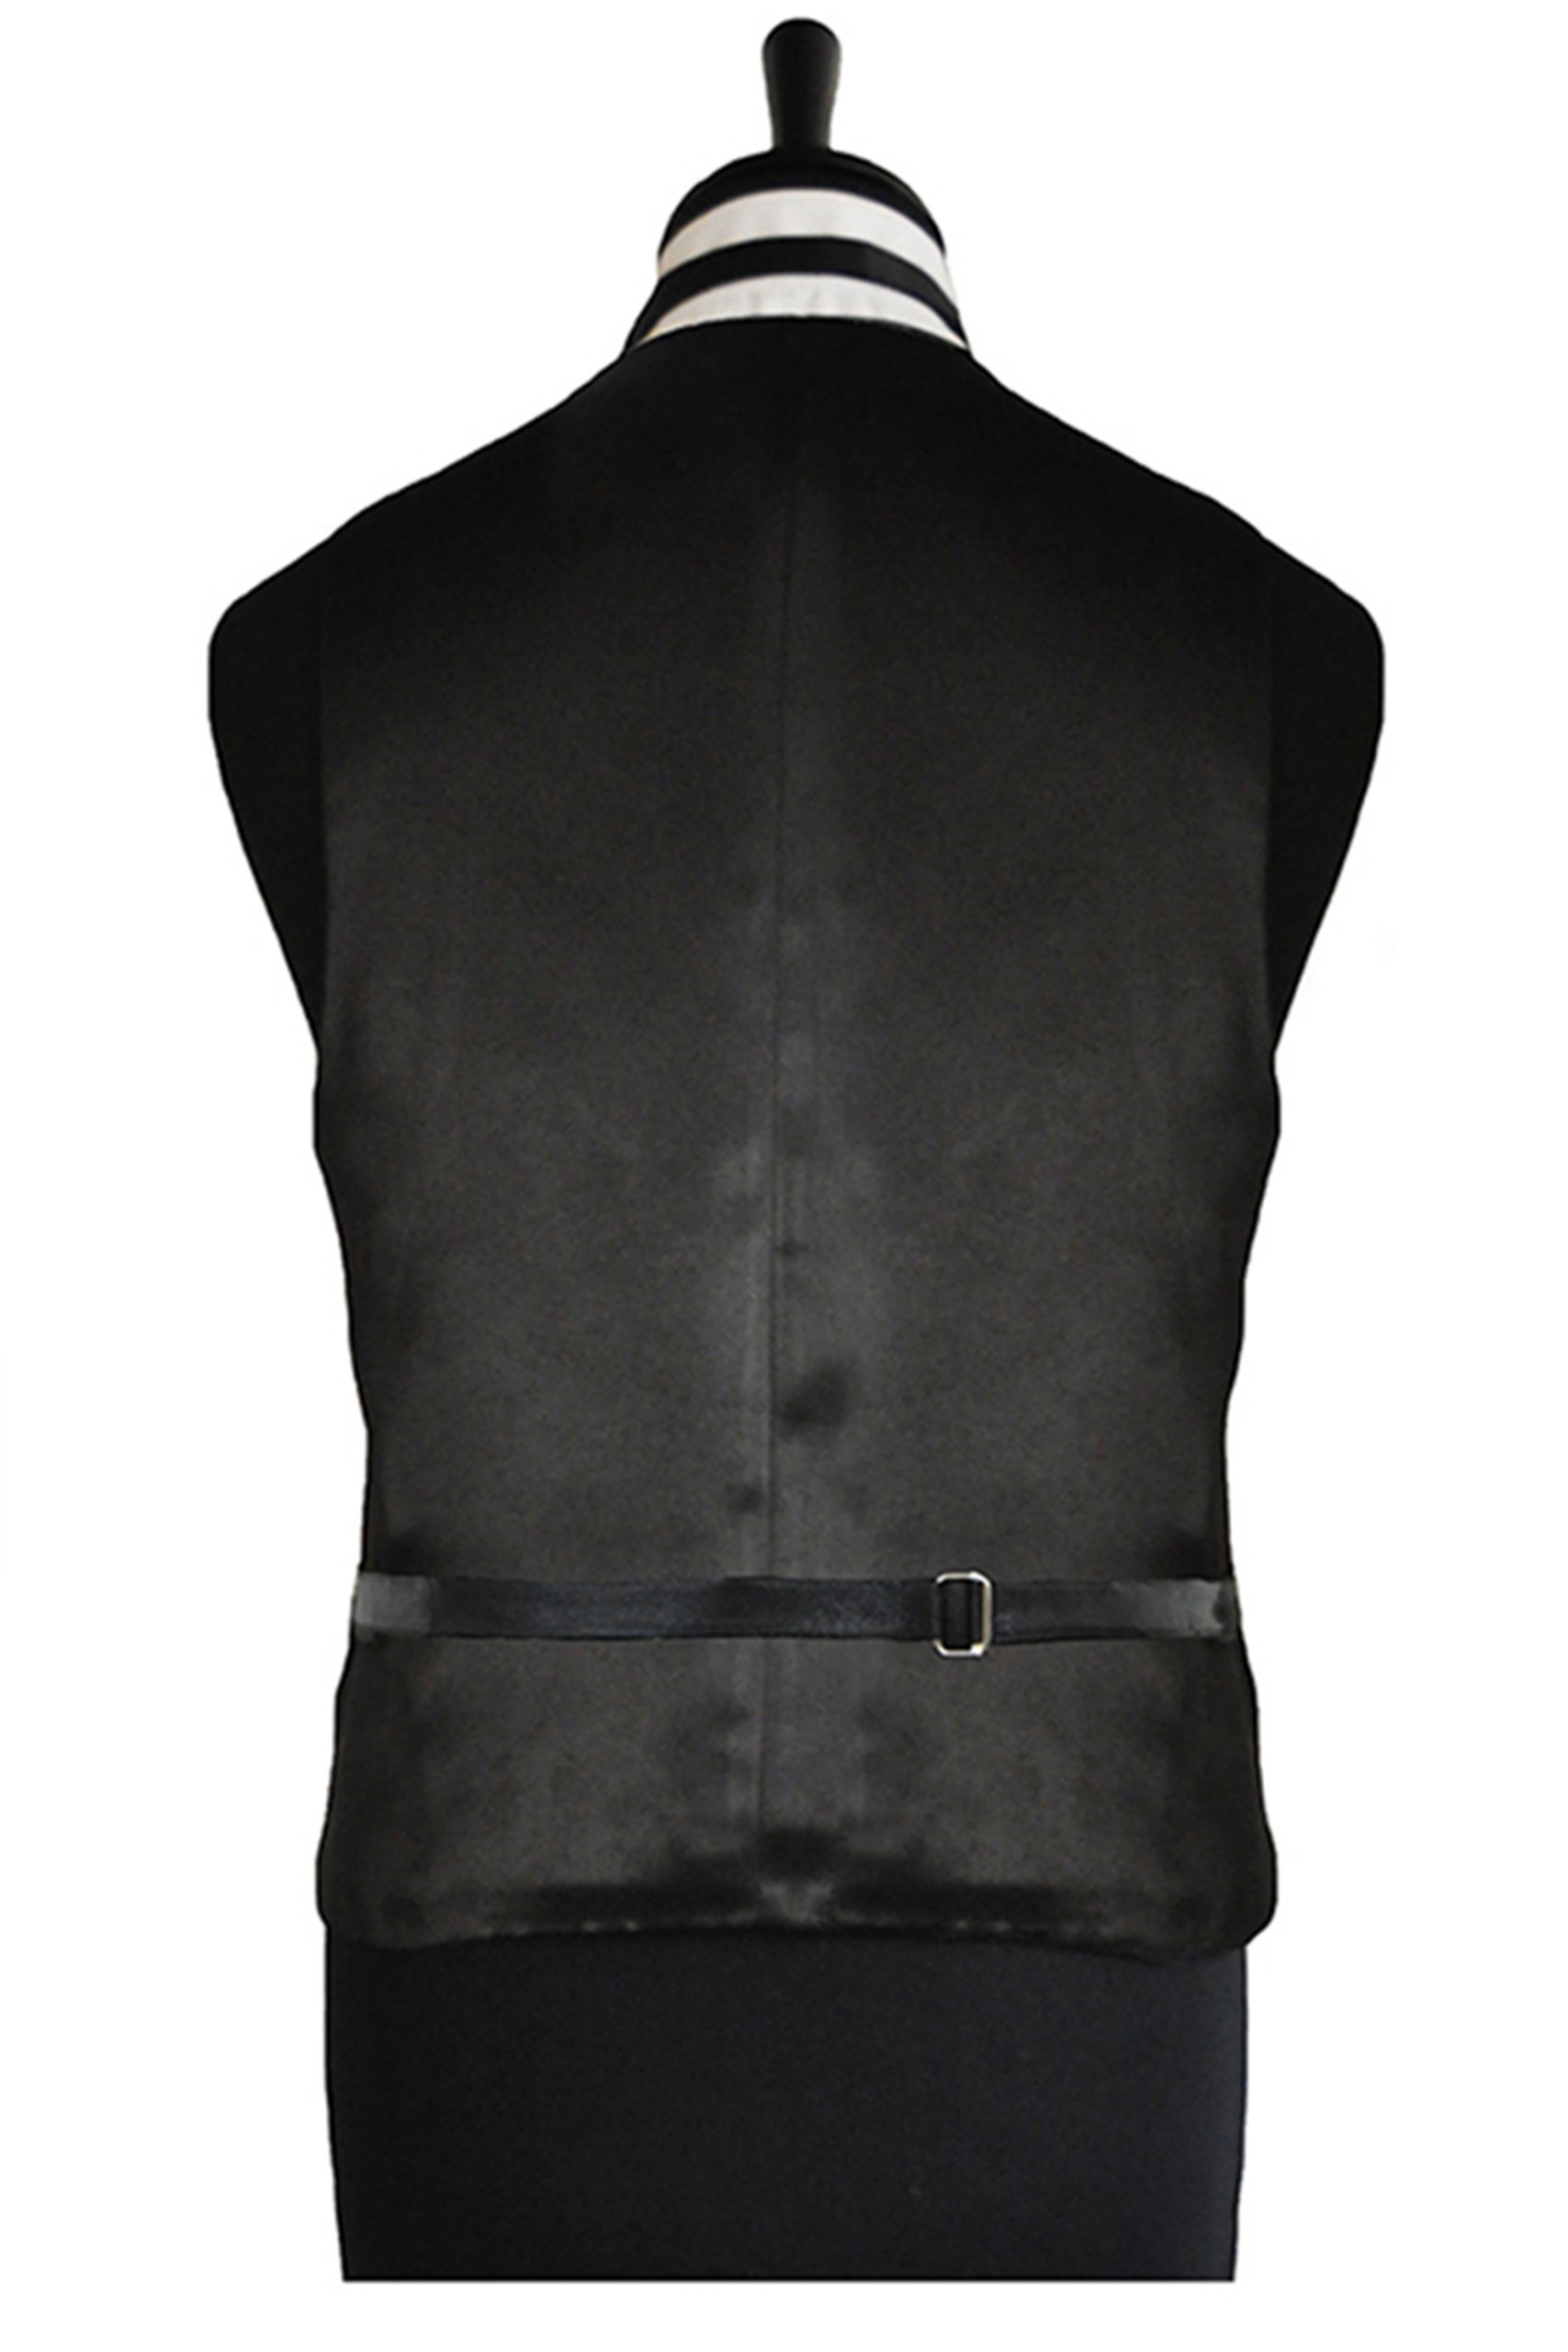 Black And Silver Circle Waistcoat - Formal Tailor